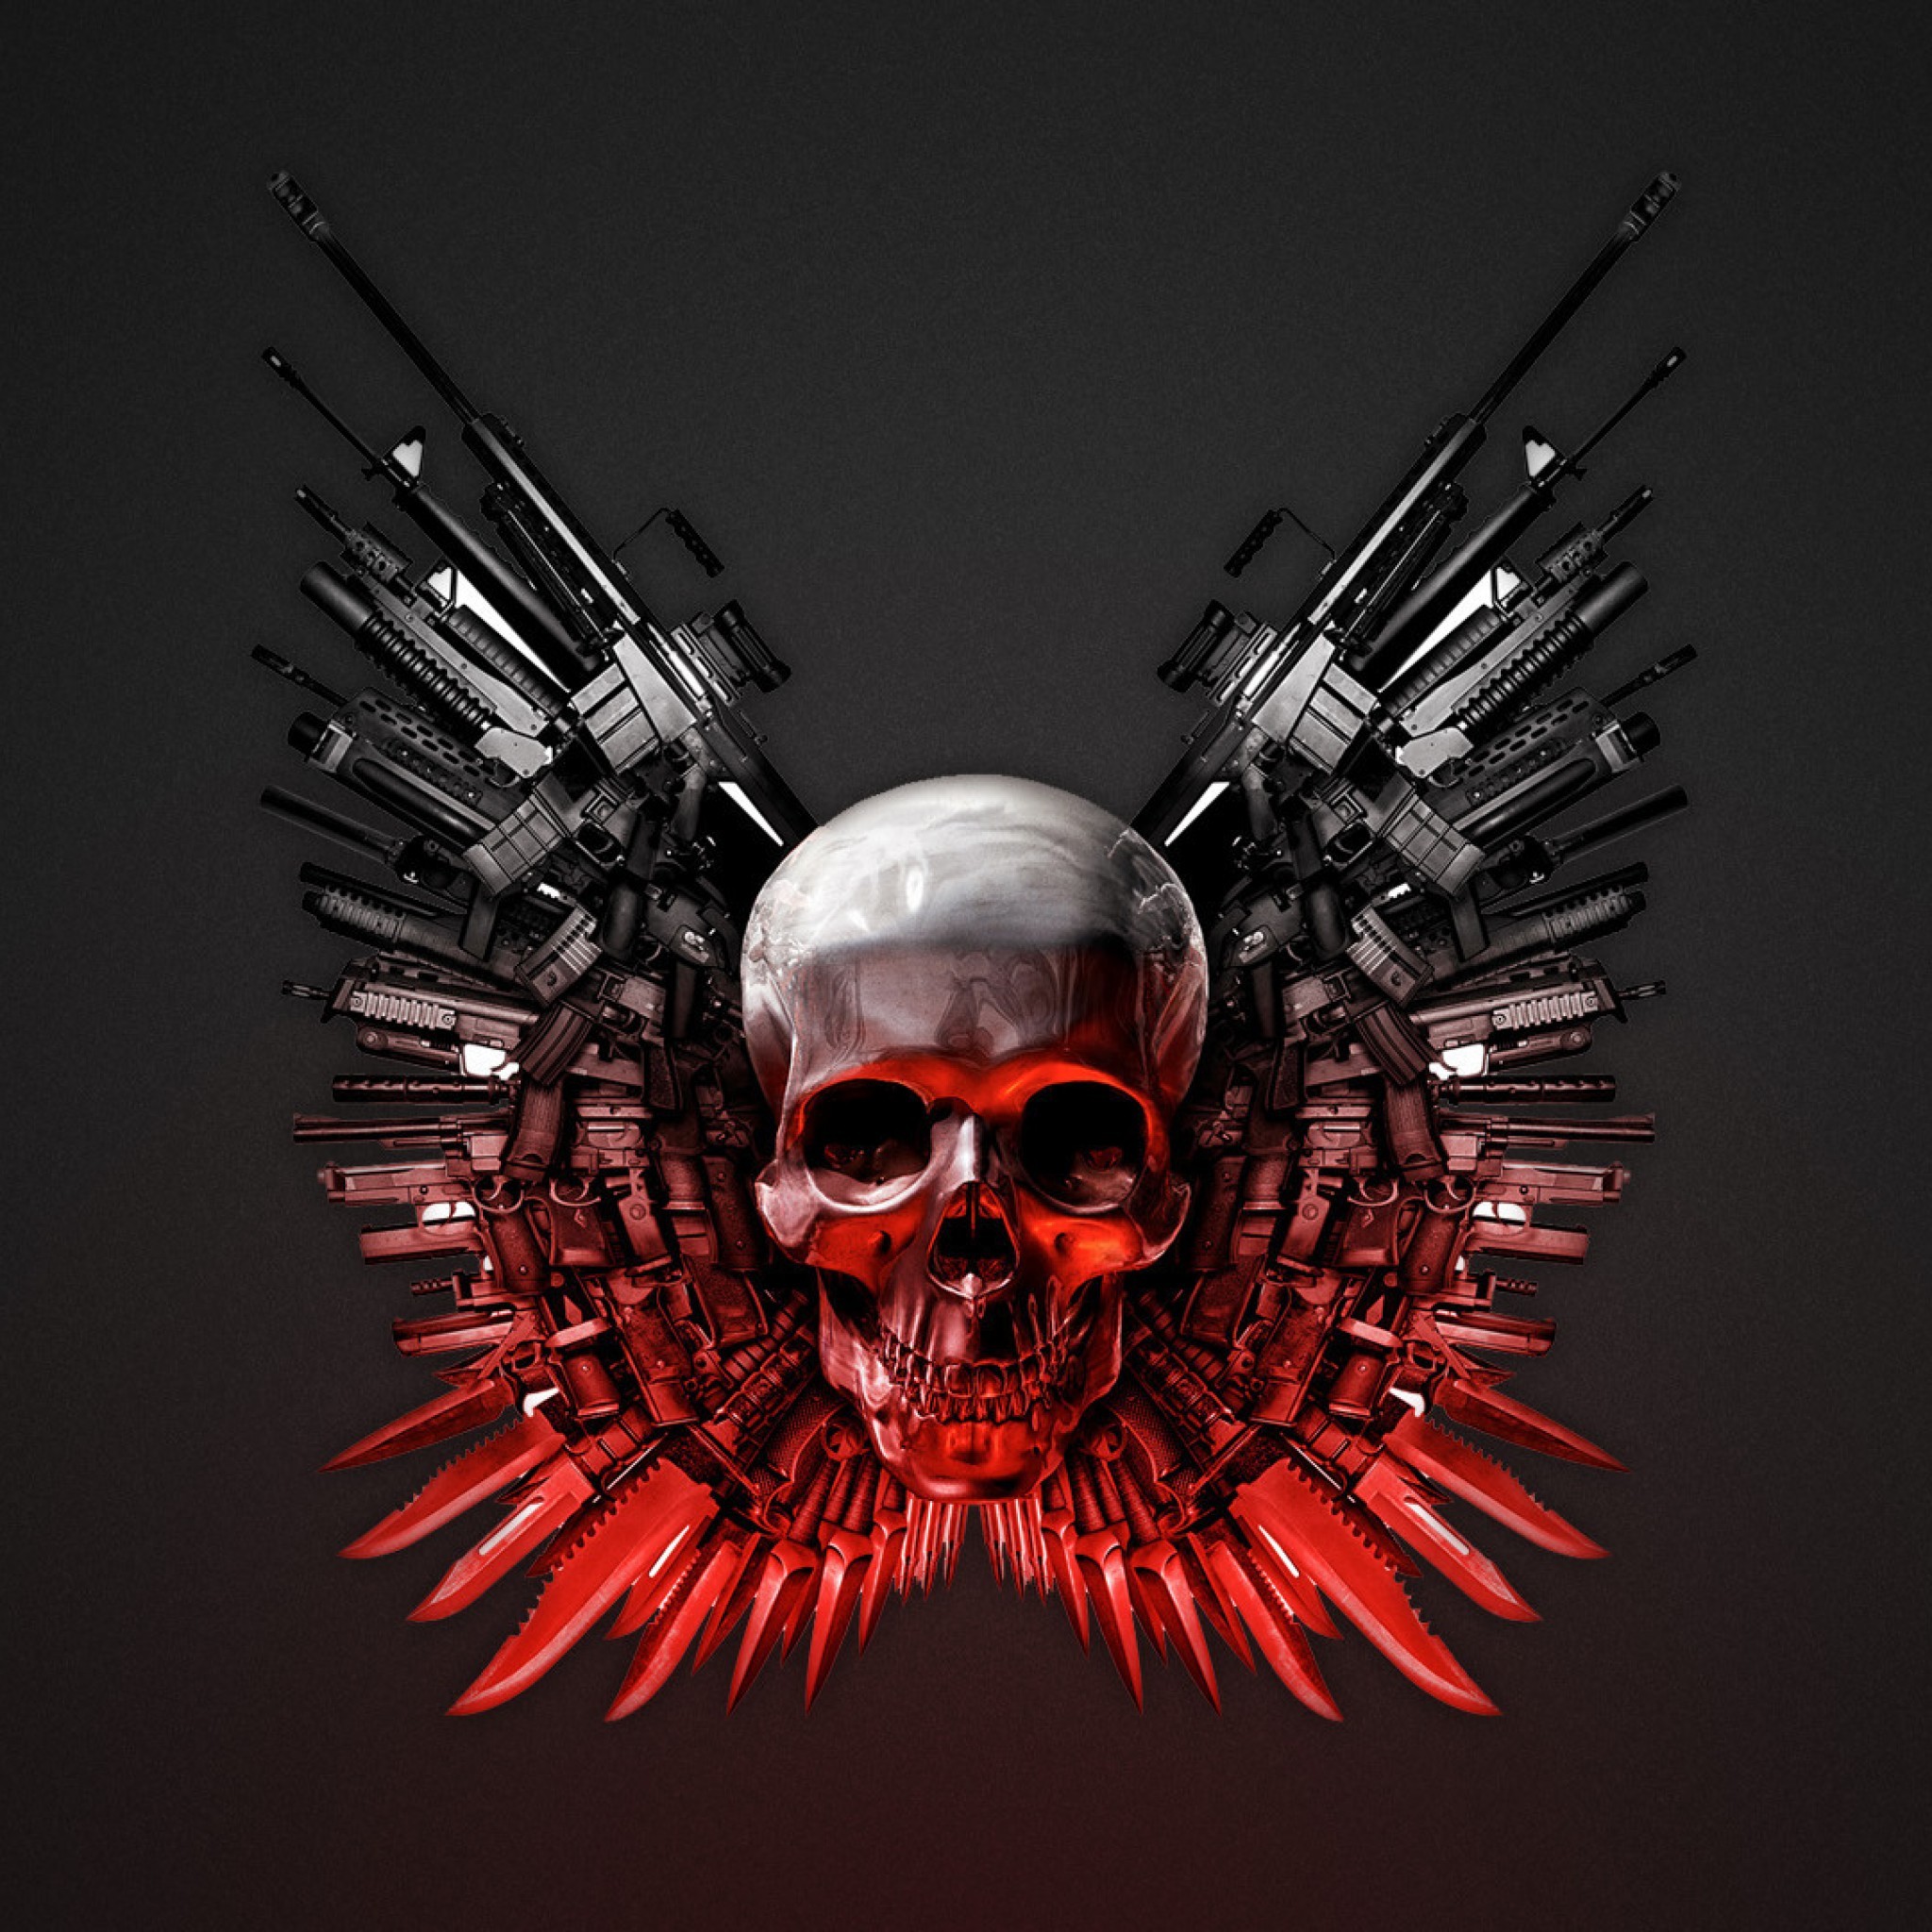 2048x2048 ... The Expendables Weapons Hd iPad Air wallpaper.